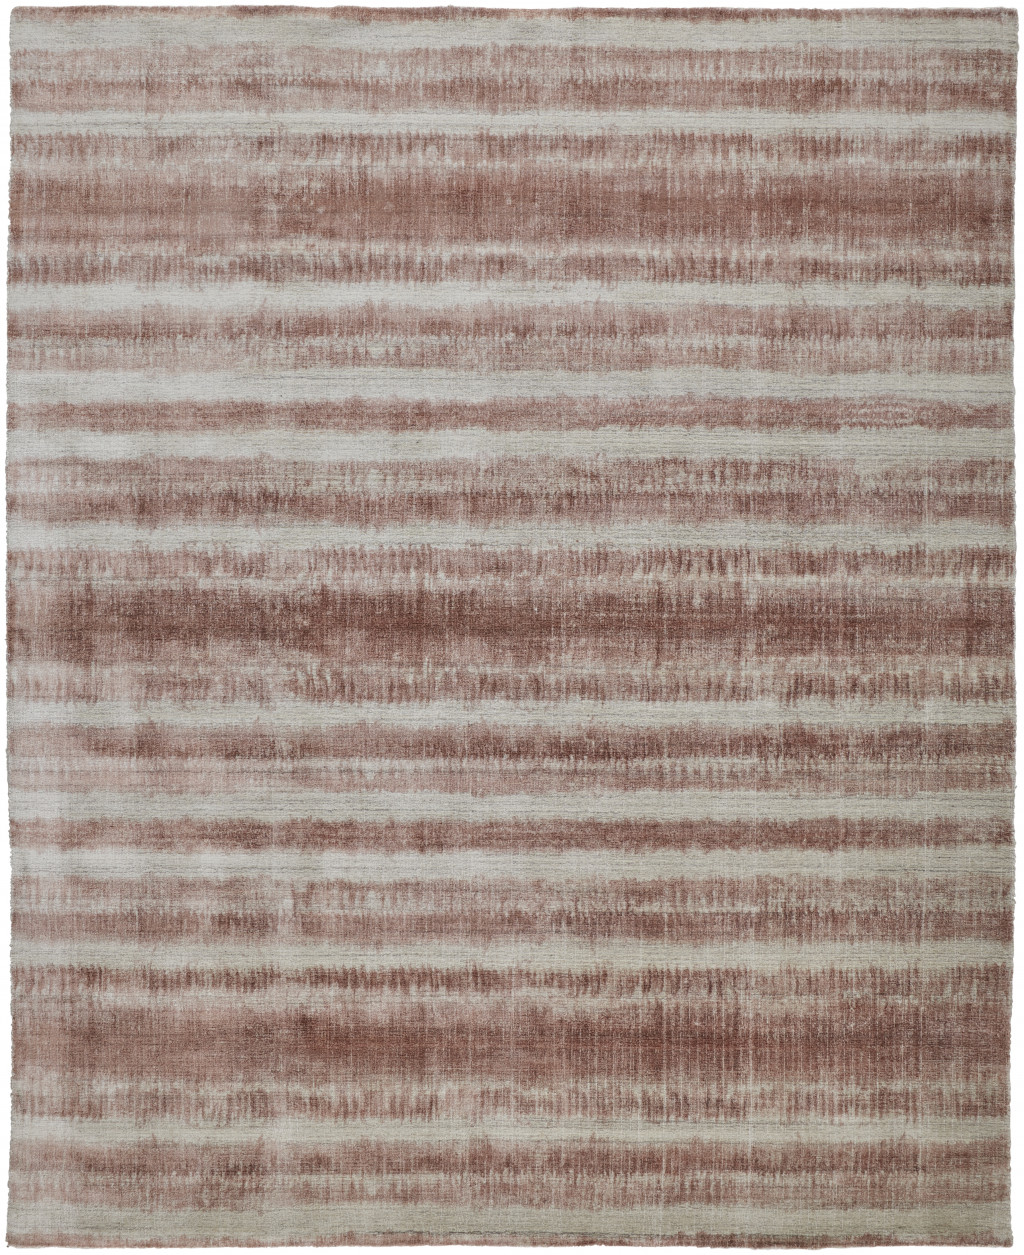 10' X 14' Tan Ivory And Pink Abstract Hand Woven Area Rug-514425-1